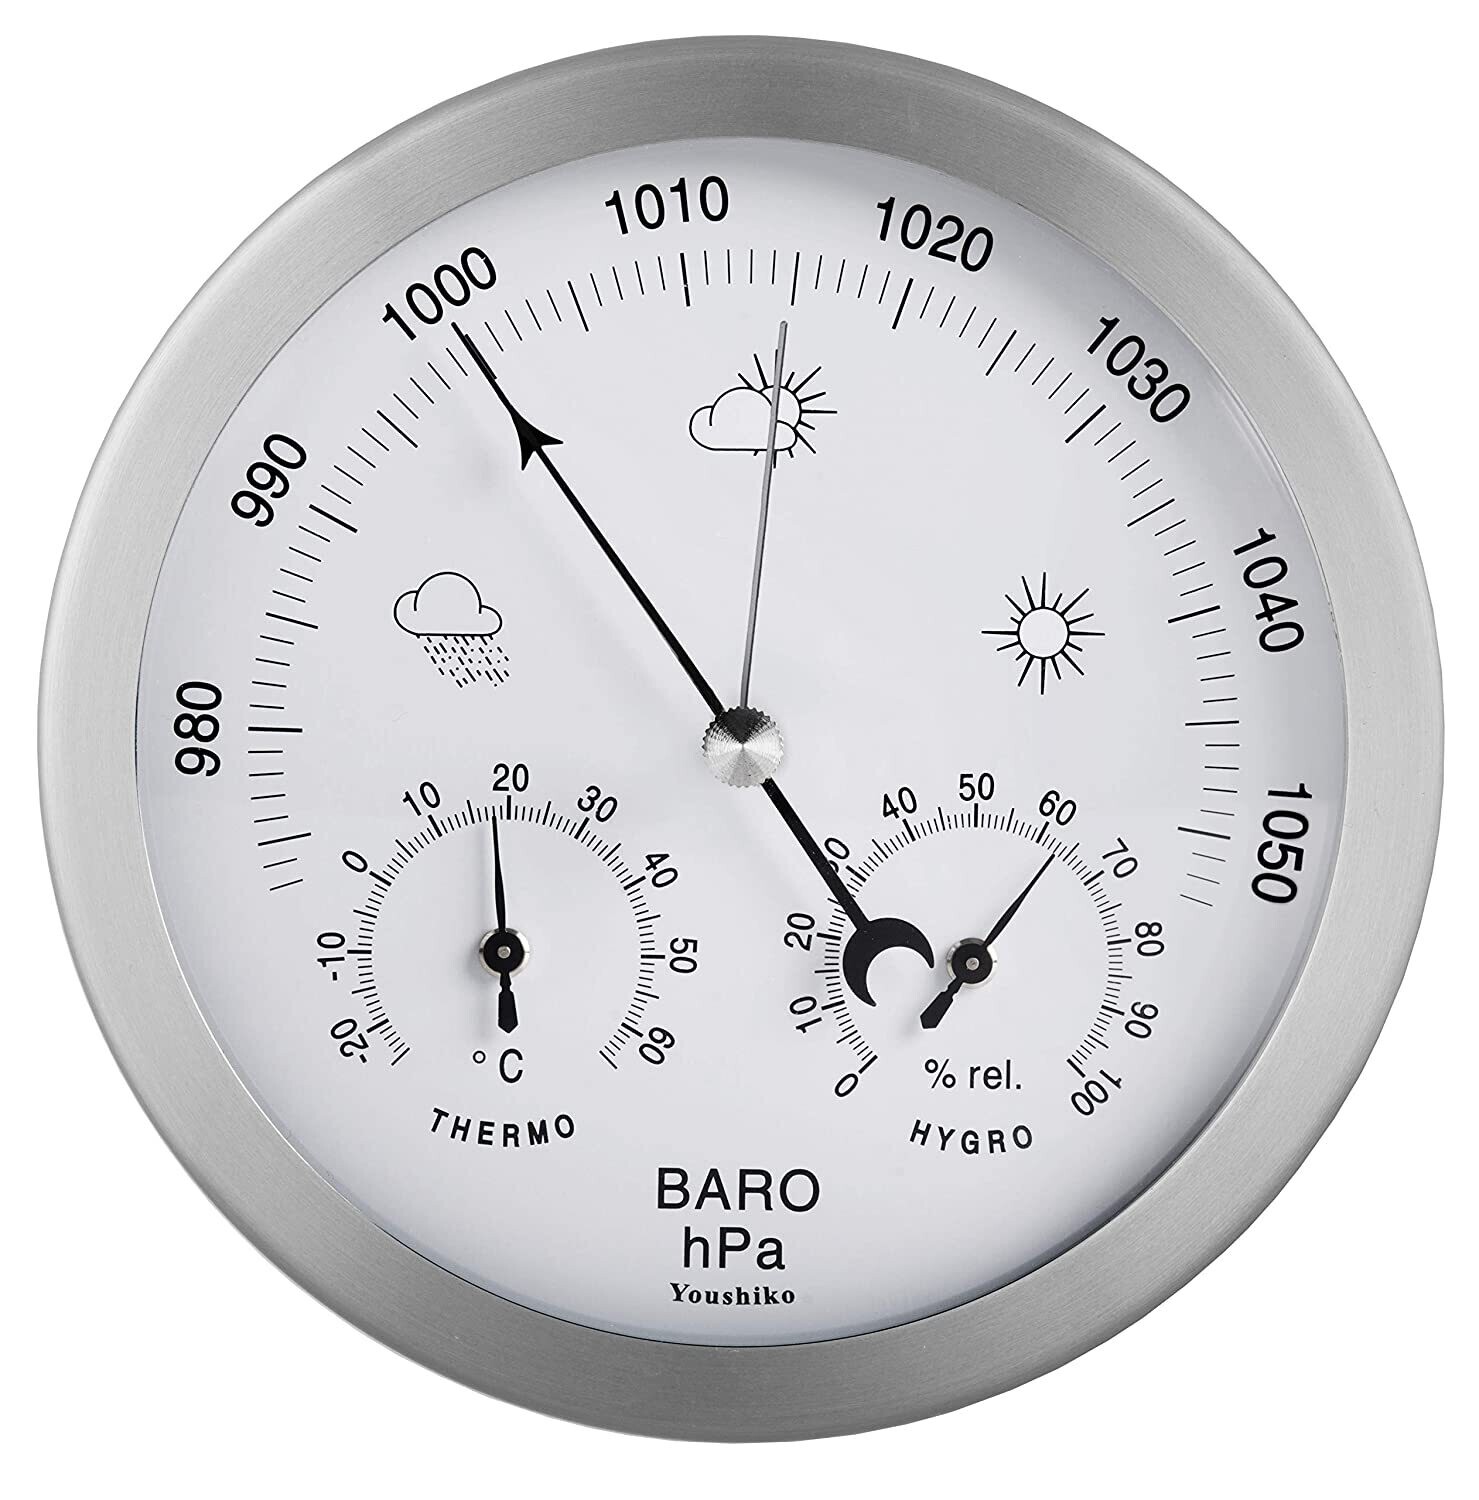 Stainless Steel Analog Barometer, Thermometer & Hygrometer, 3 in 1 Indoor and Outdoor (Silver) Weather Station